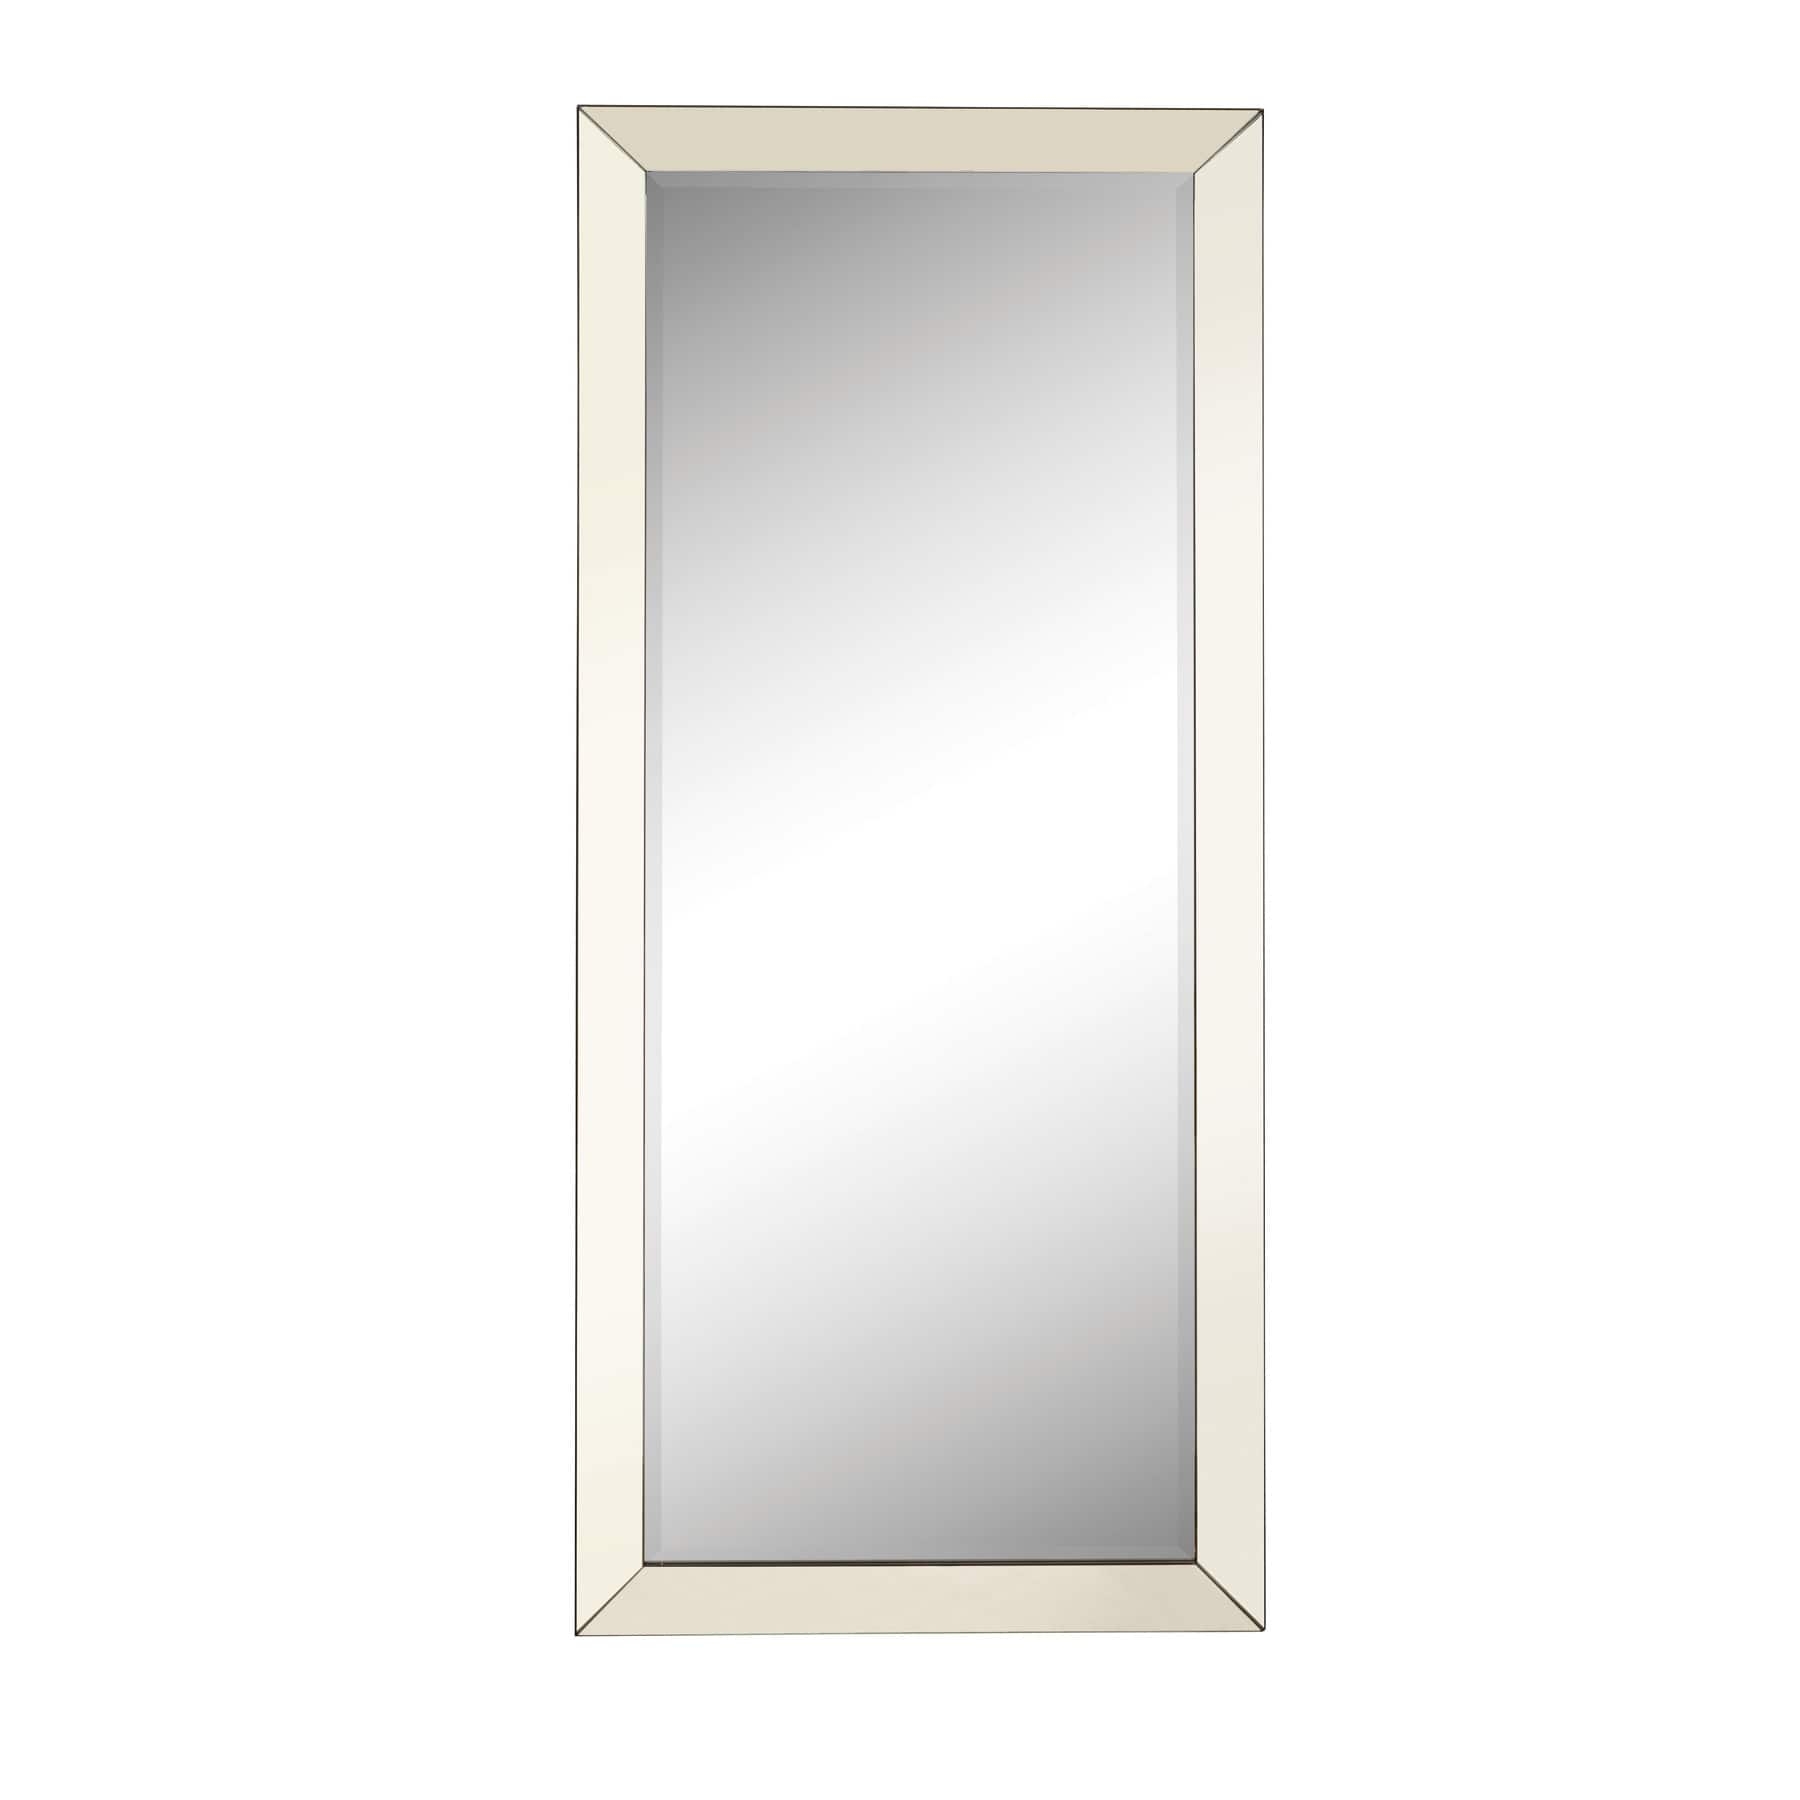 Large Standing Wall Mirror with Mirror Frame - Image 1